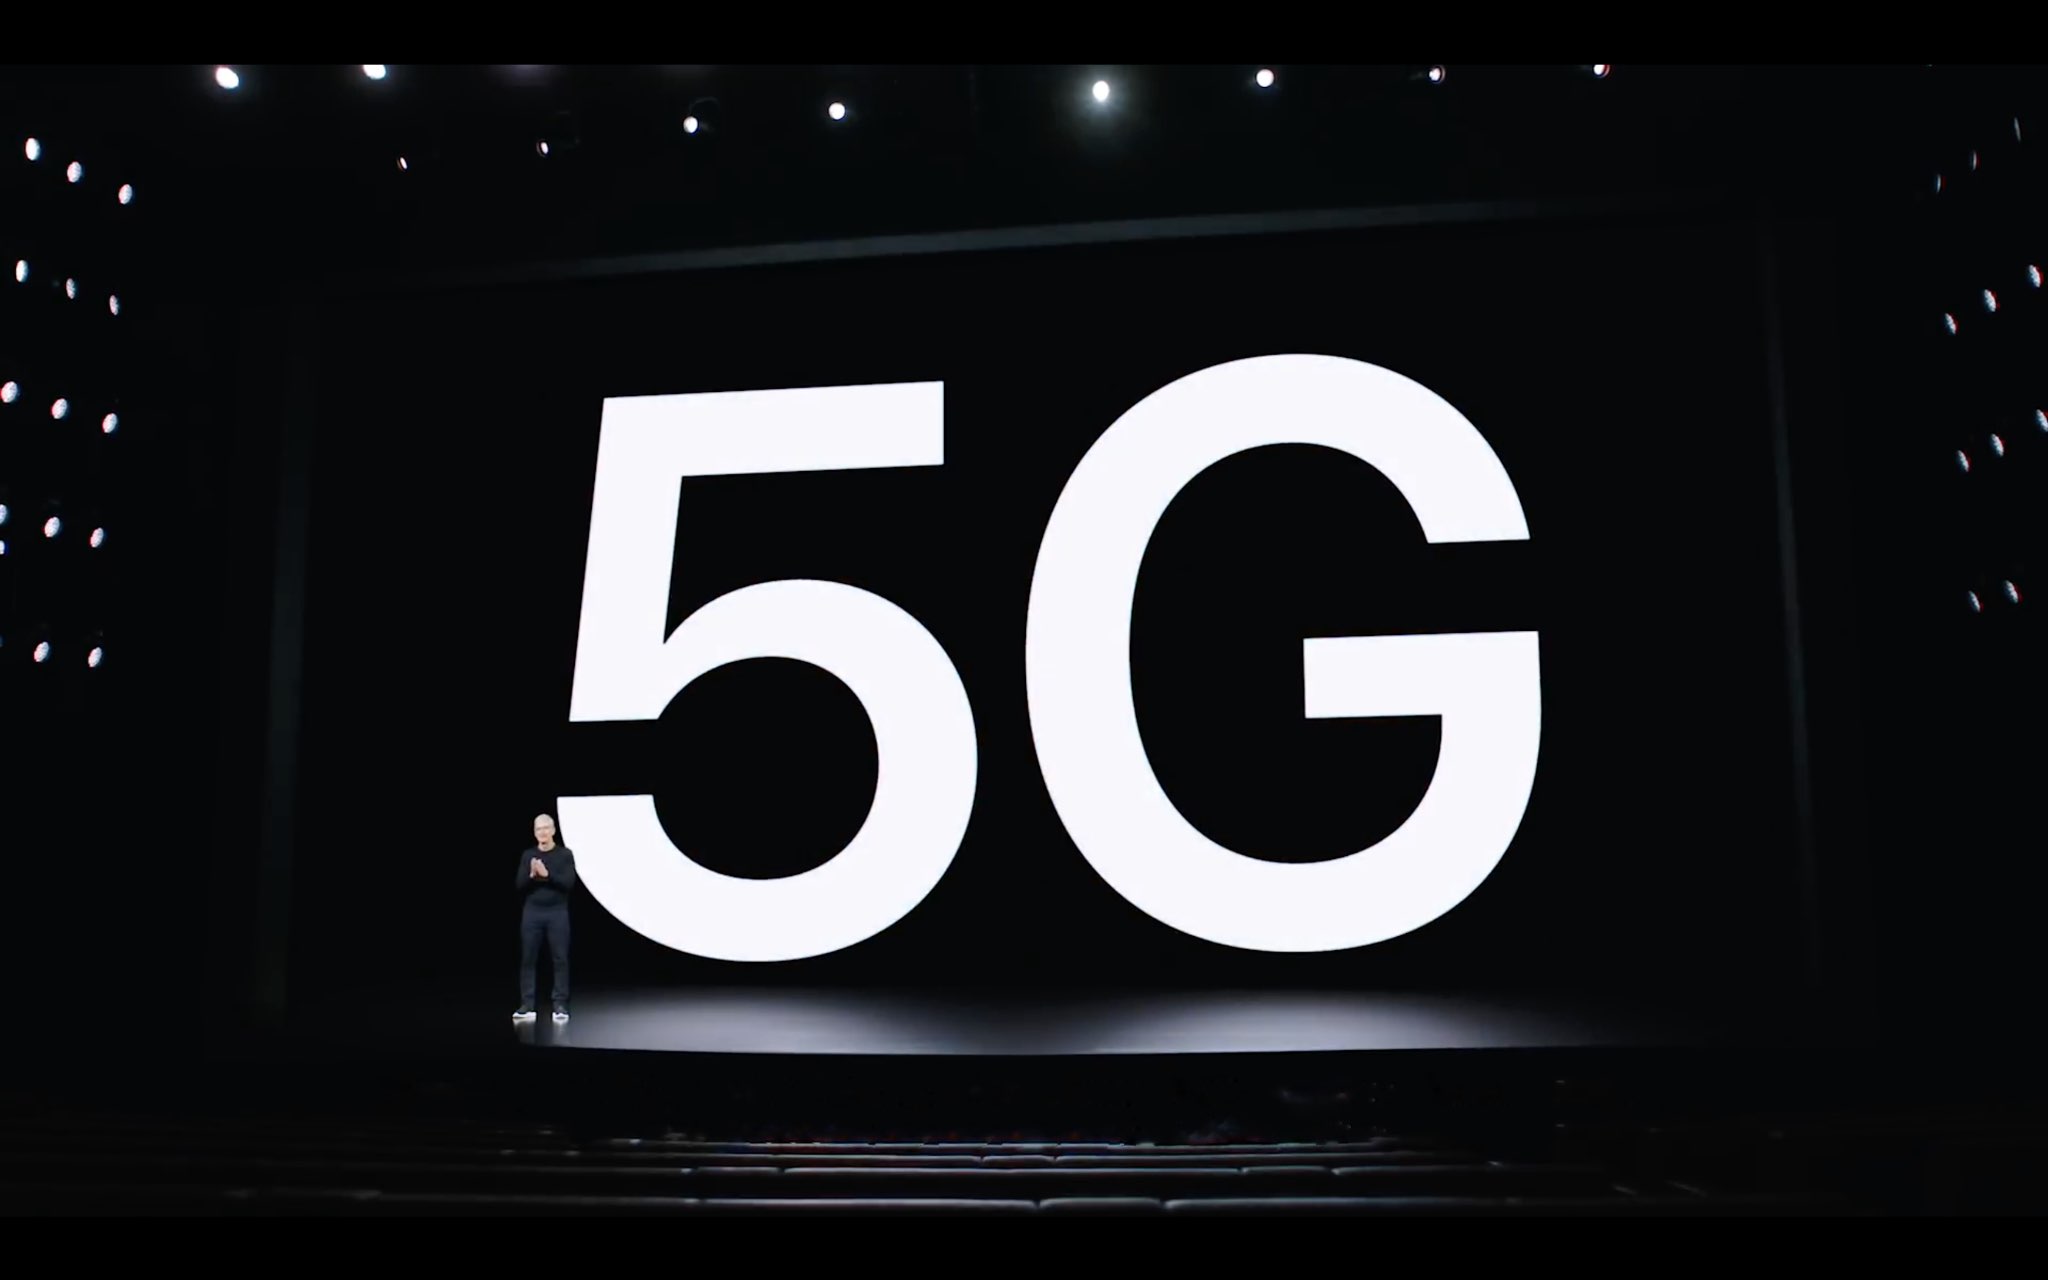 manage 5G iPhone - WWDC 2020 slide showing 5G